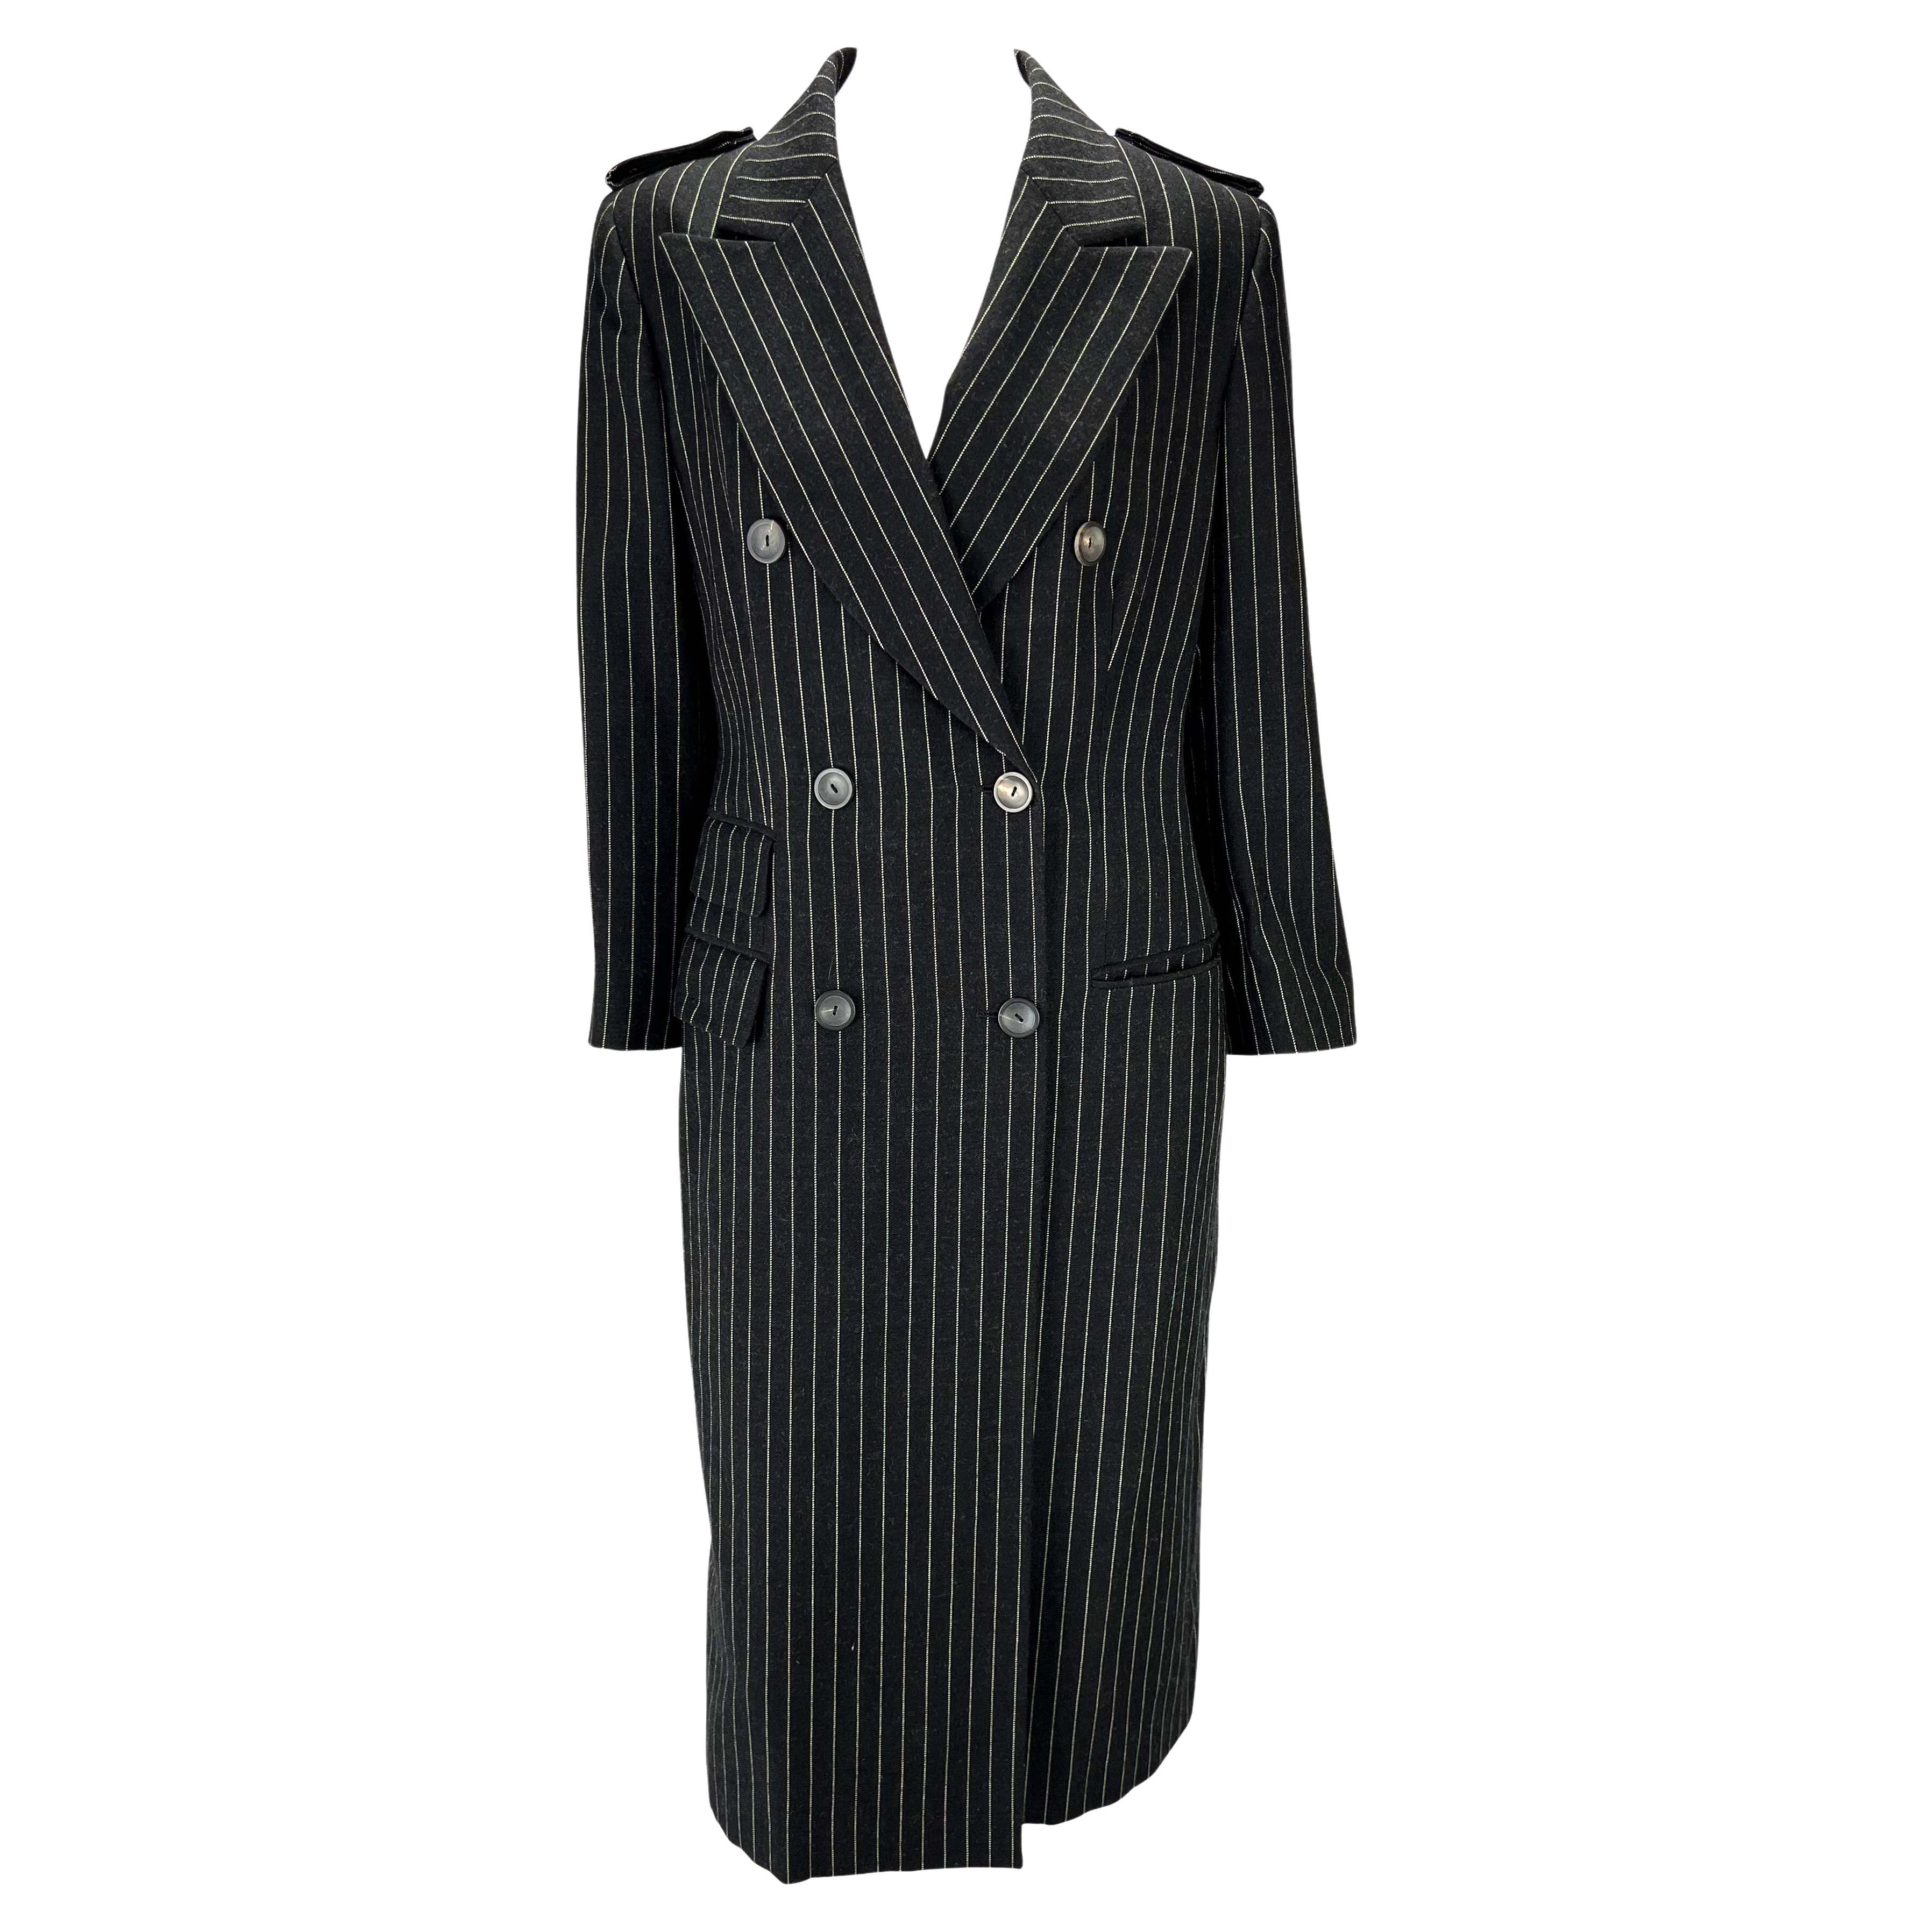 F/W 1996 Gucci by Tom Ford Runway Black Pinstripe Wool Trench Overcoat